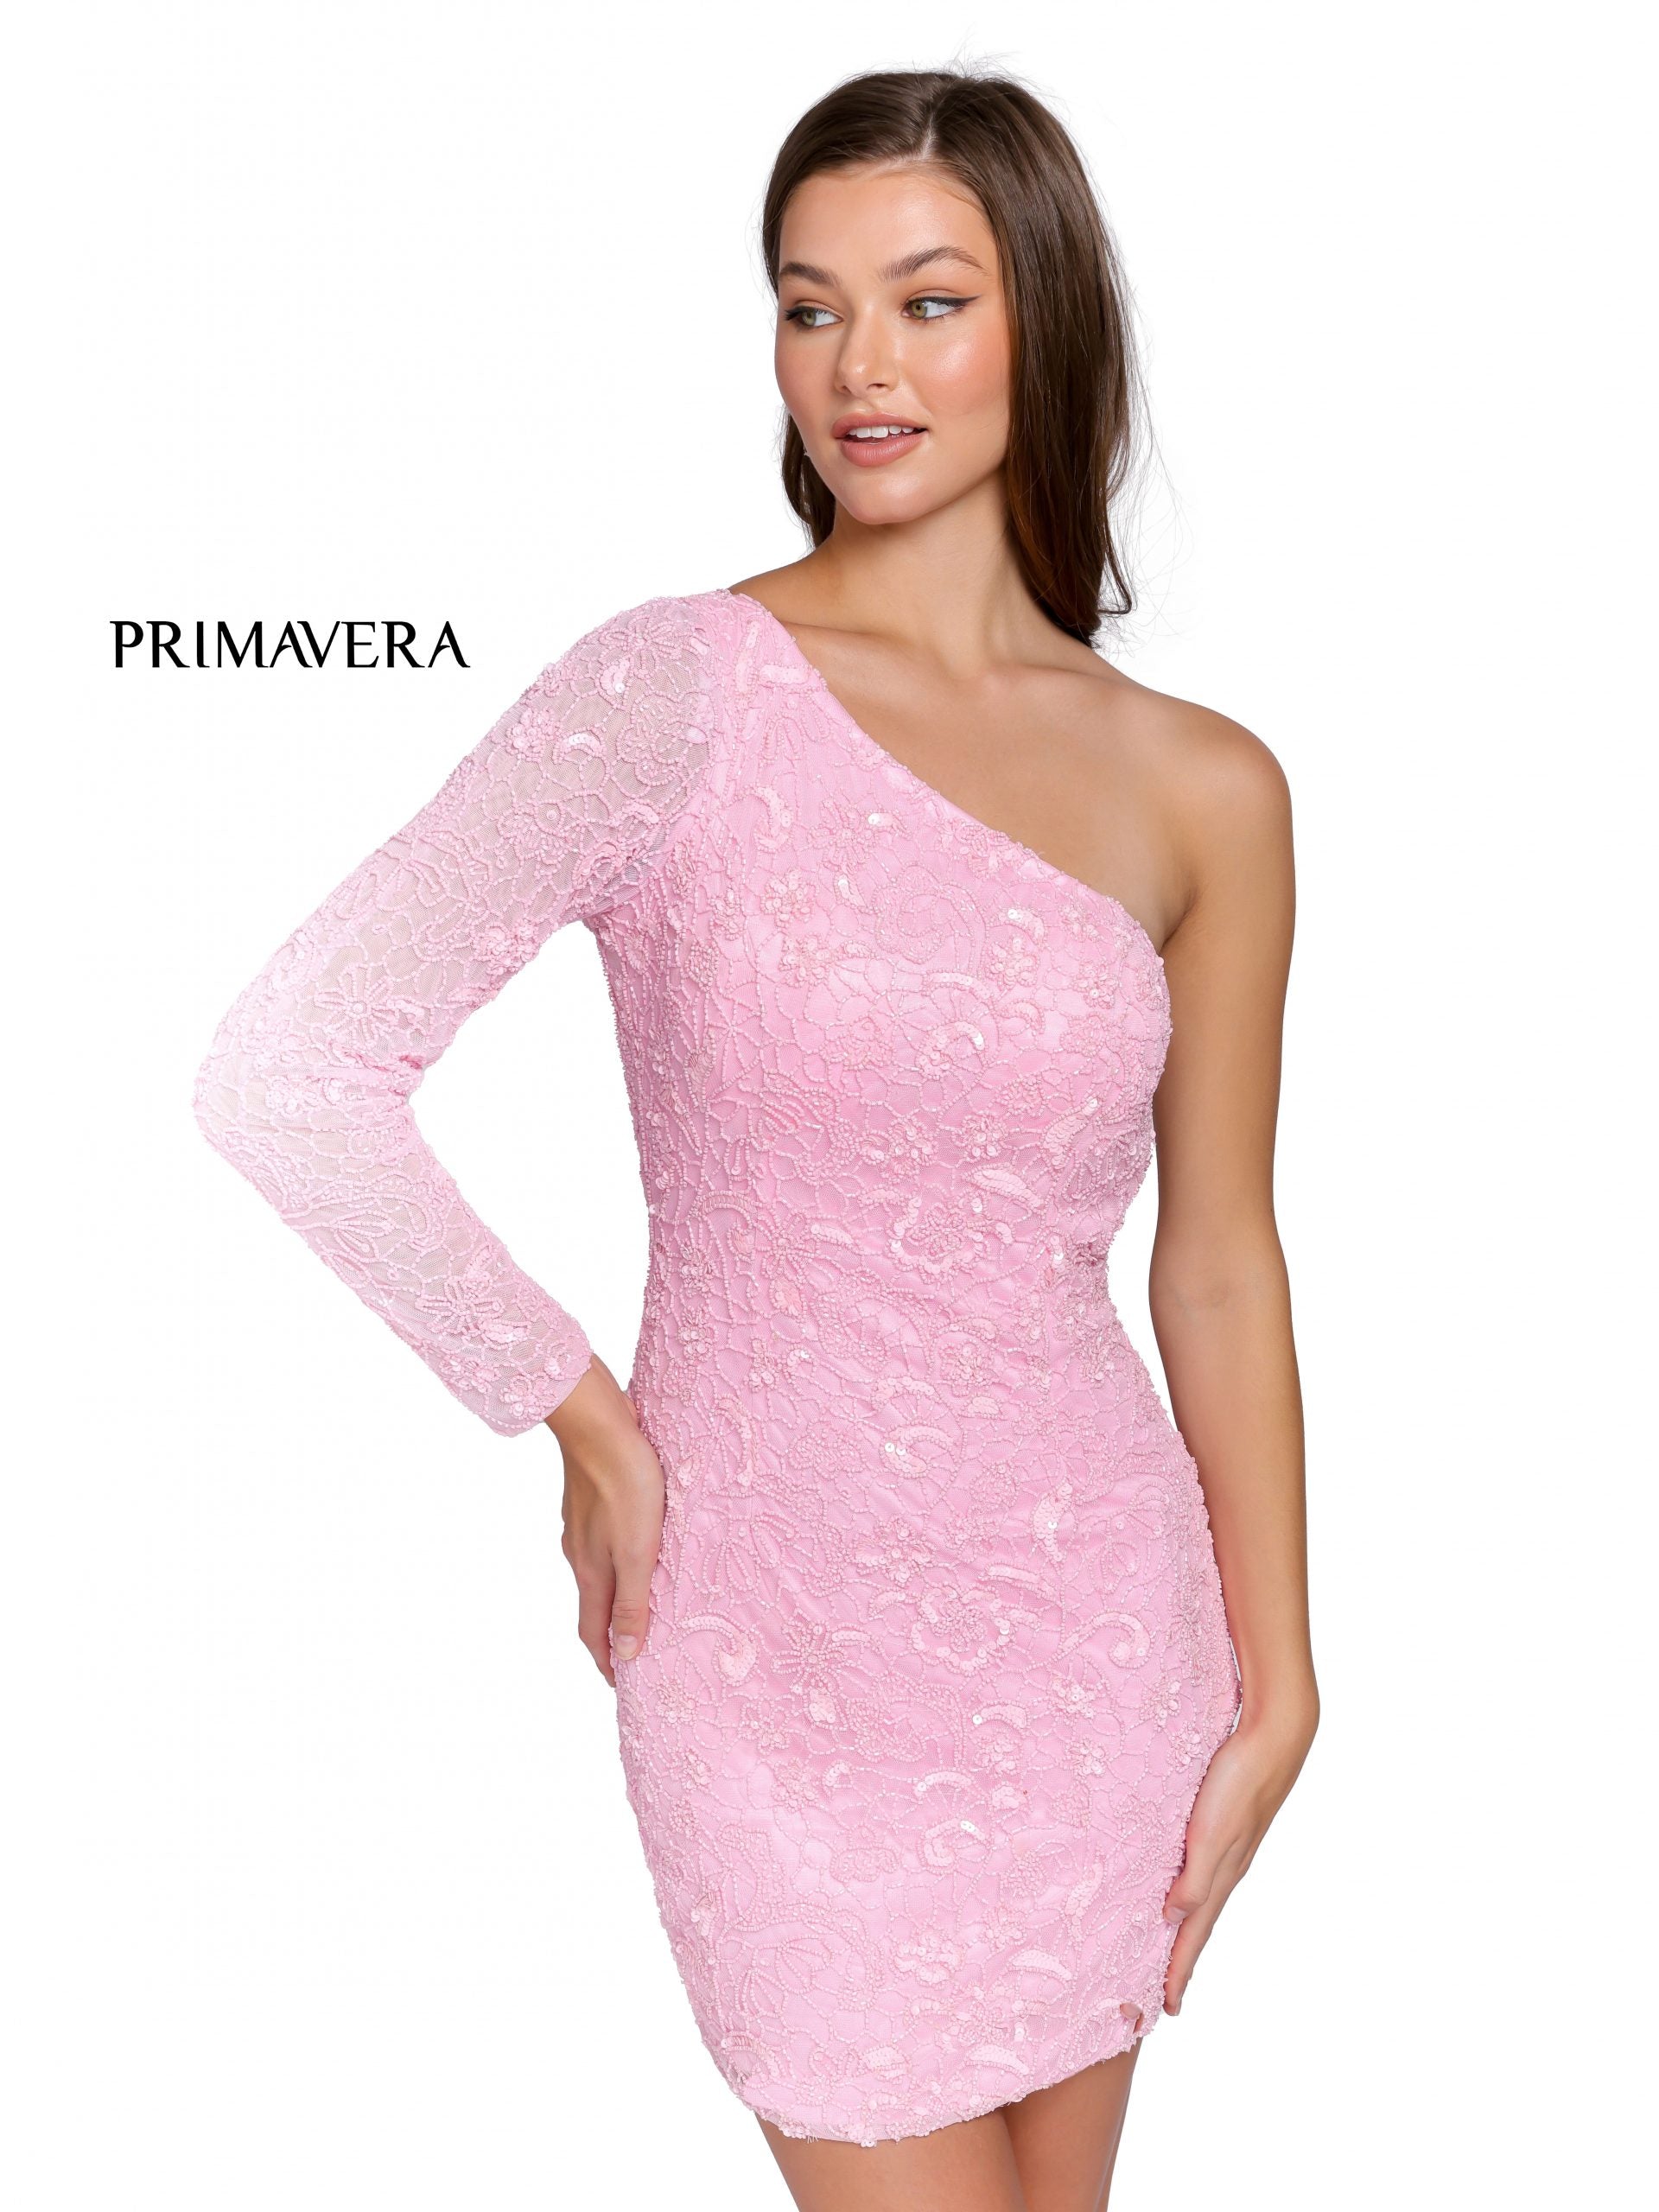 Primavera-Couture-3865-PINK-Cocktail-Dress-One-Shoulder-One-Long-sleeve-backless